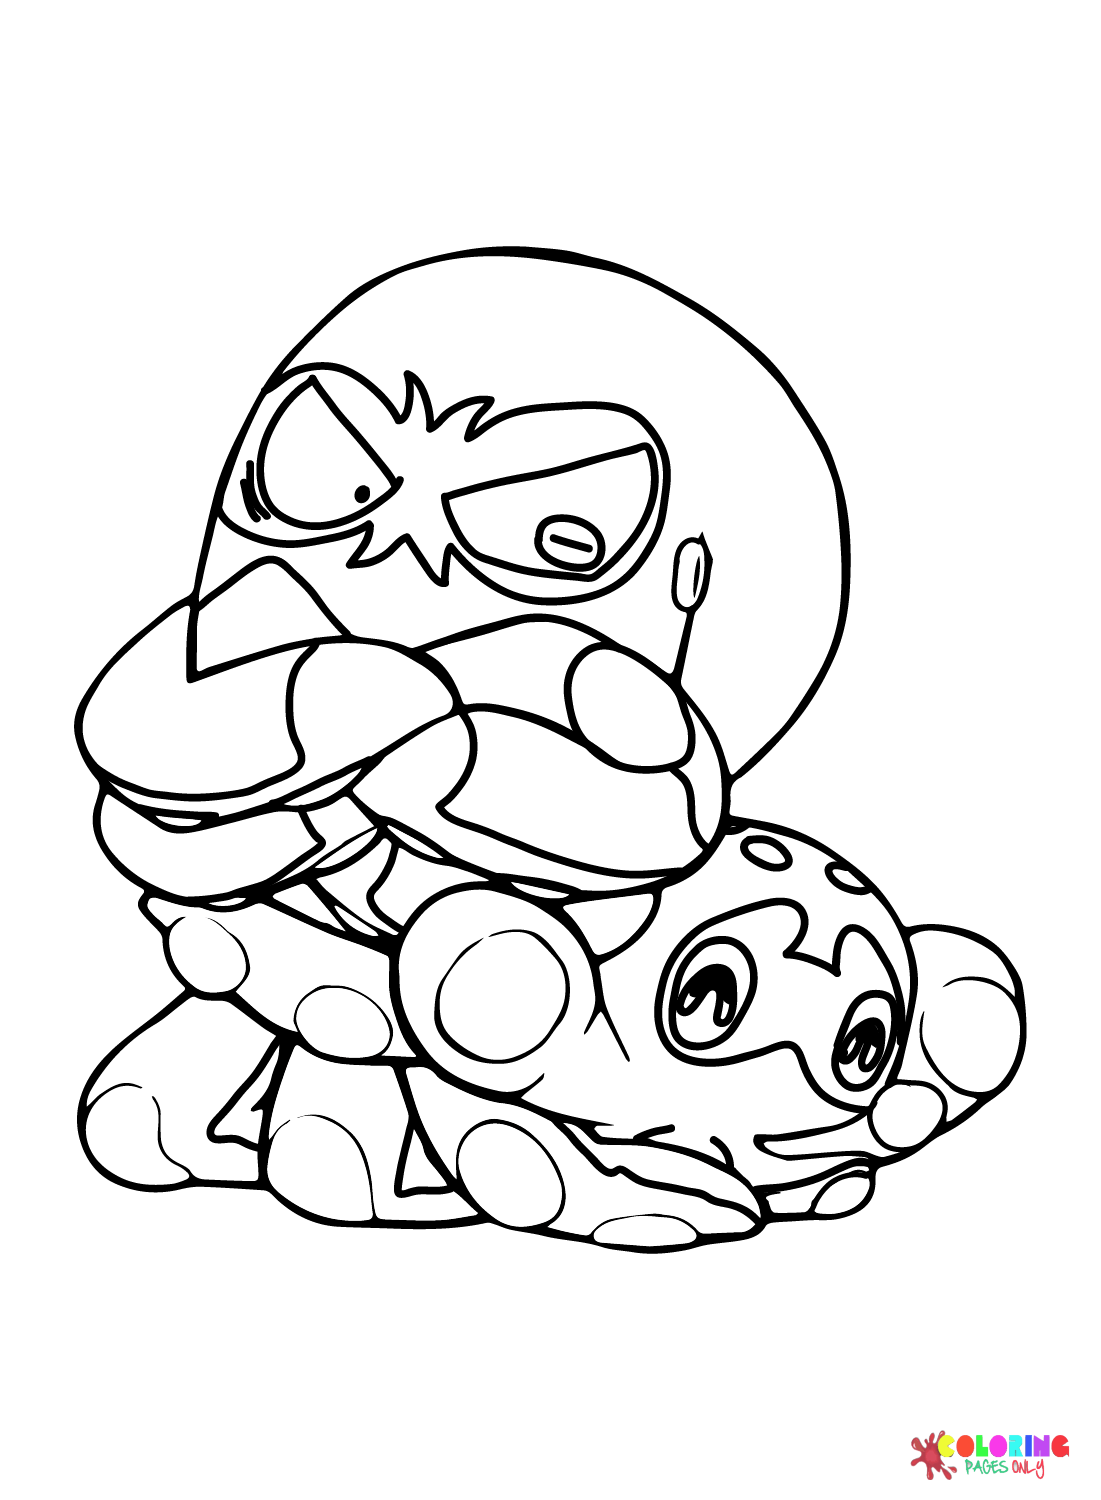 Grapploct and Clobbopus Coloring Page